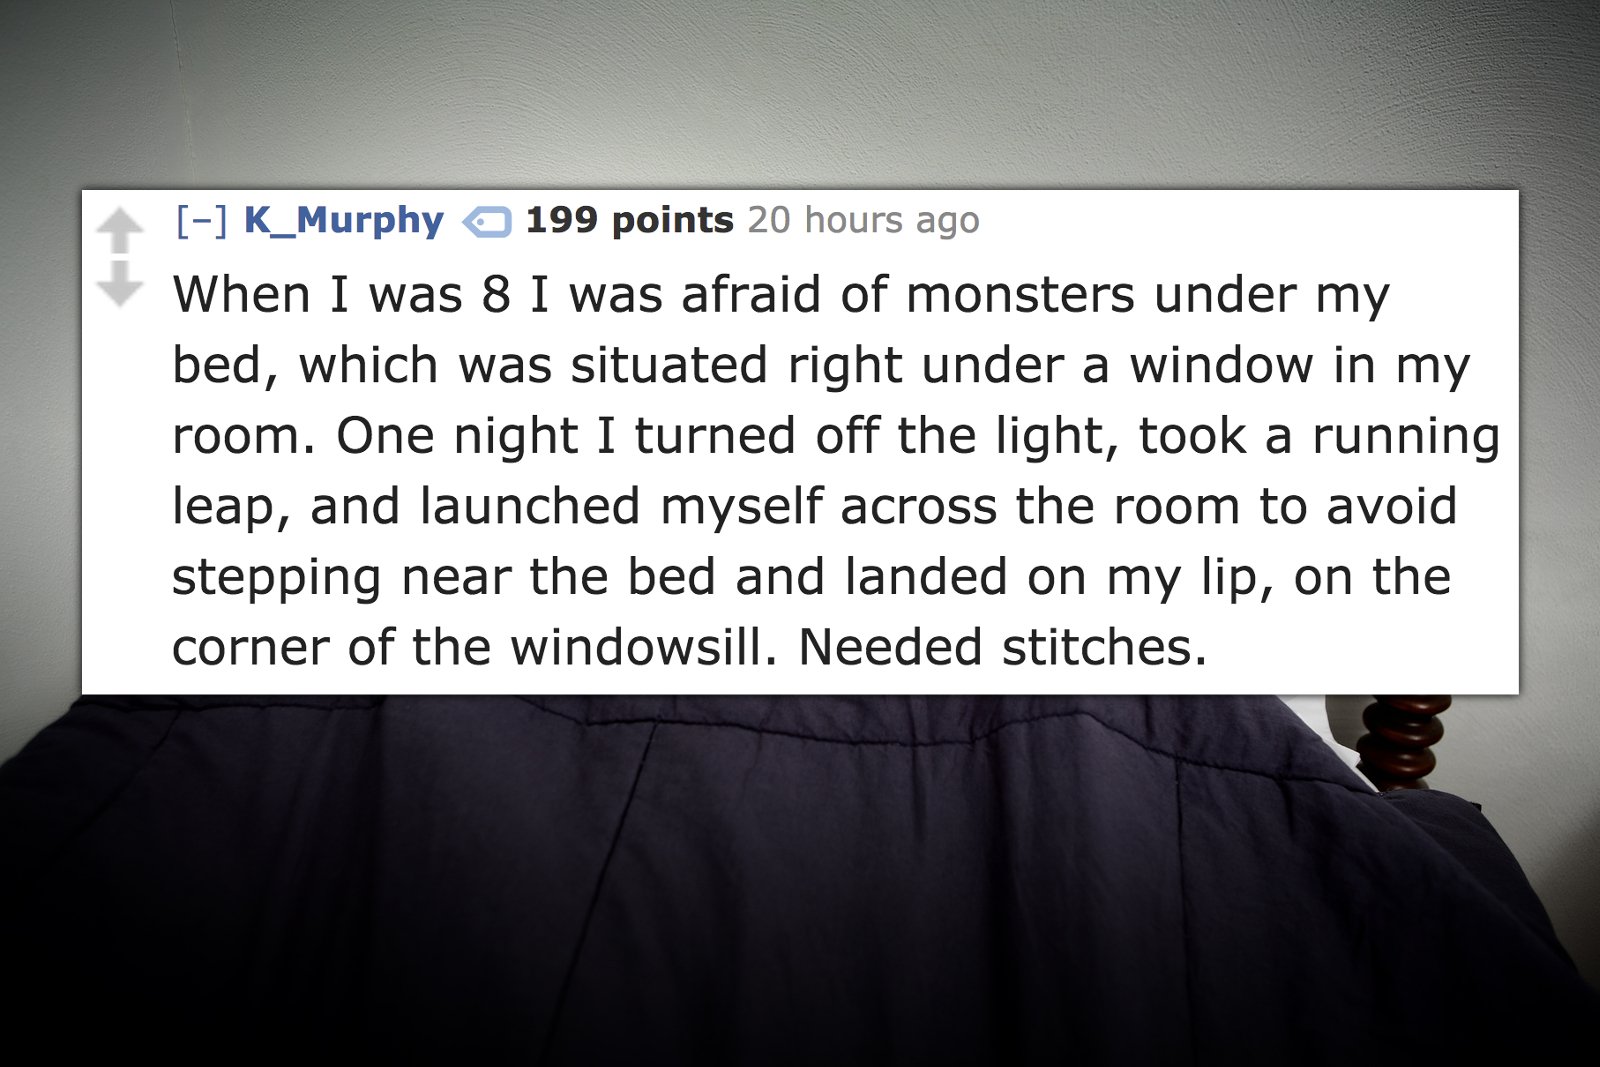 presentation - K_Murphy 199 points 20 hours ago When I was 8 I was afraid of monsters under my bed, which was situated right under a window in my room. One night I turned off the light, took a running leap, and launched myself across the room to avoid ste